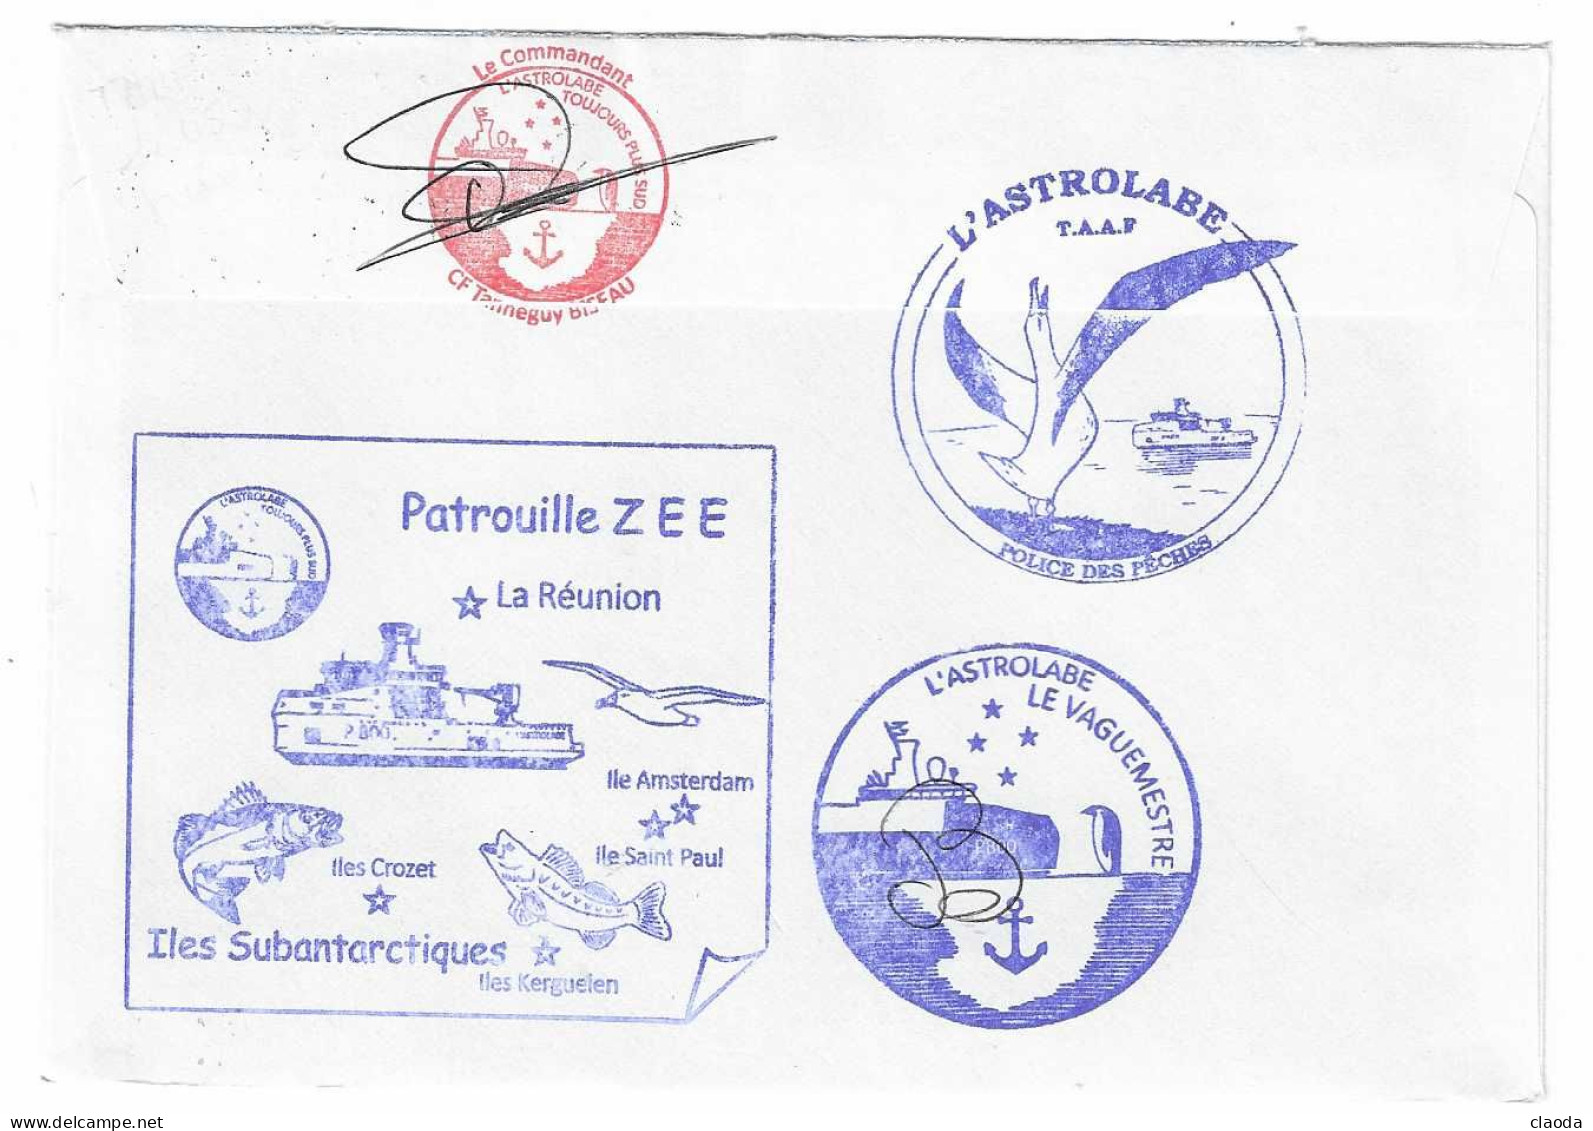 AB 16 - L'ASTROLABE - PATROUILLE ZEE - ÎLES SUBANTARCTIQUES 2023 - CROZET (ALFRED FAURE) TP TAAF - 2 SCAN - Covers & Documents